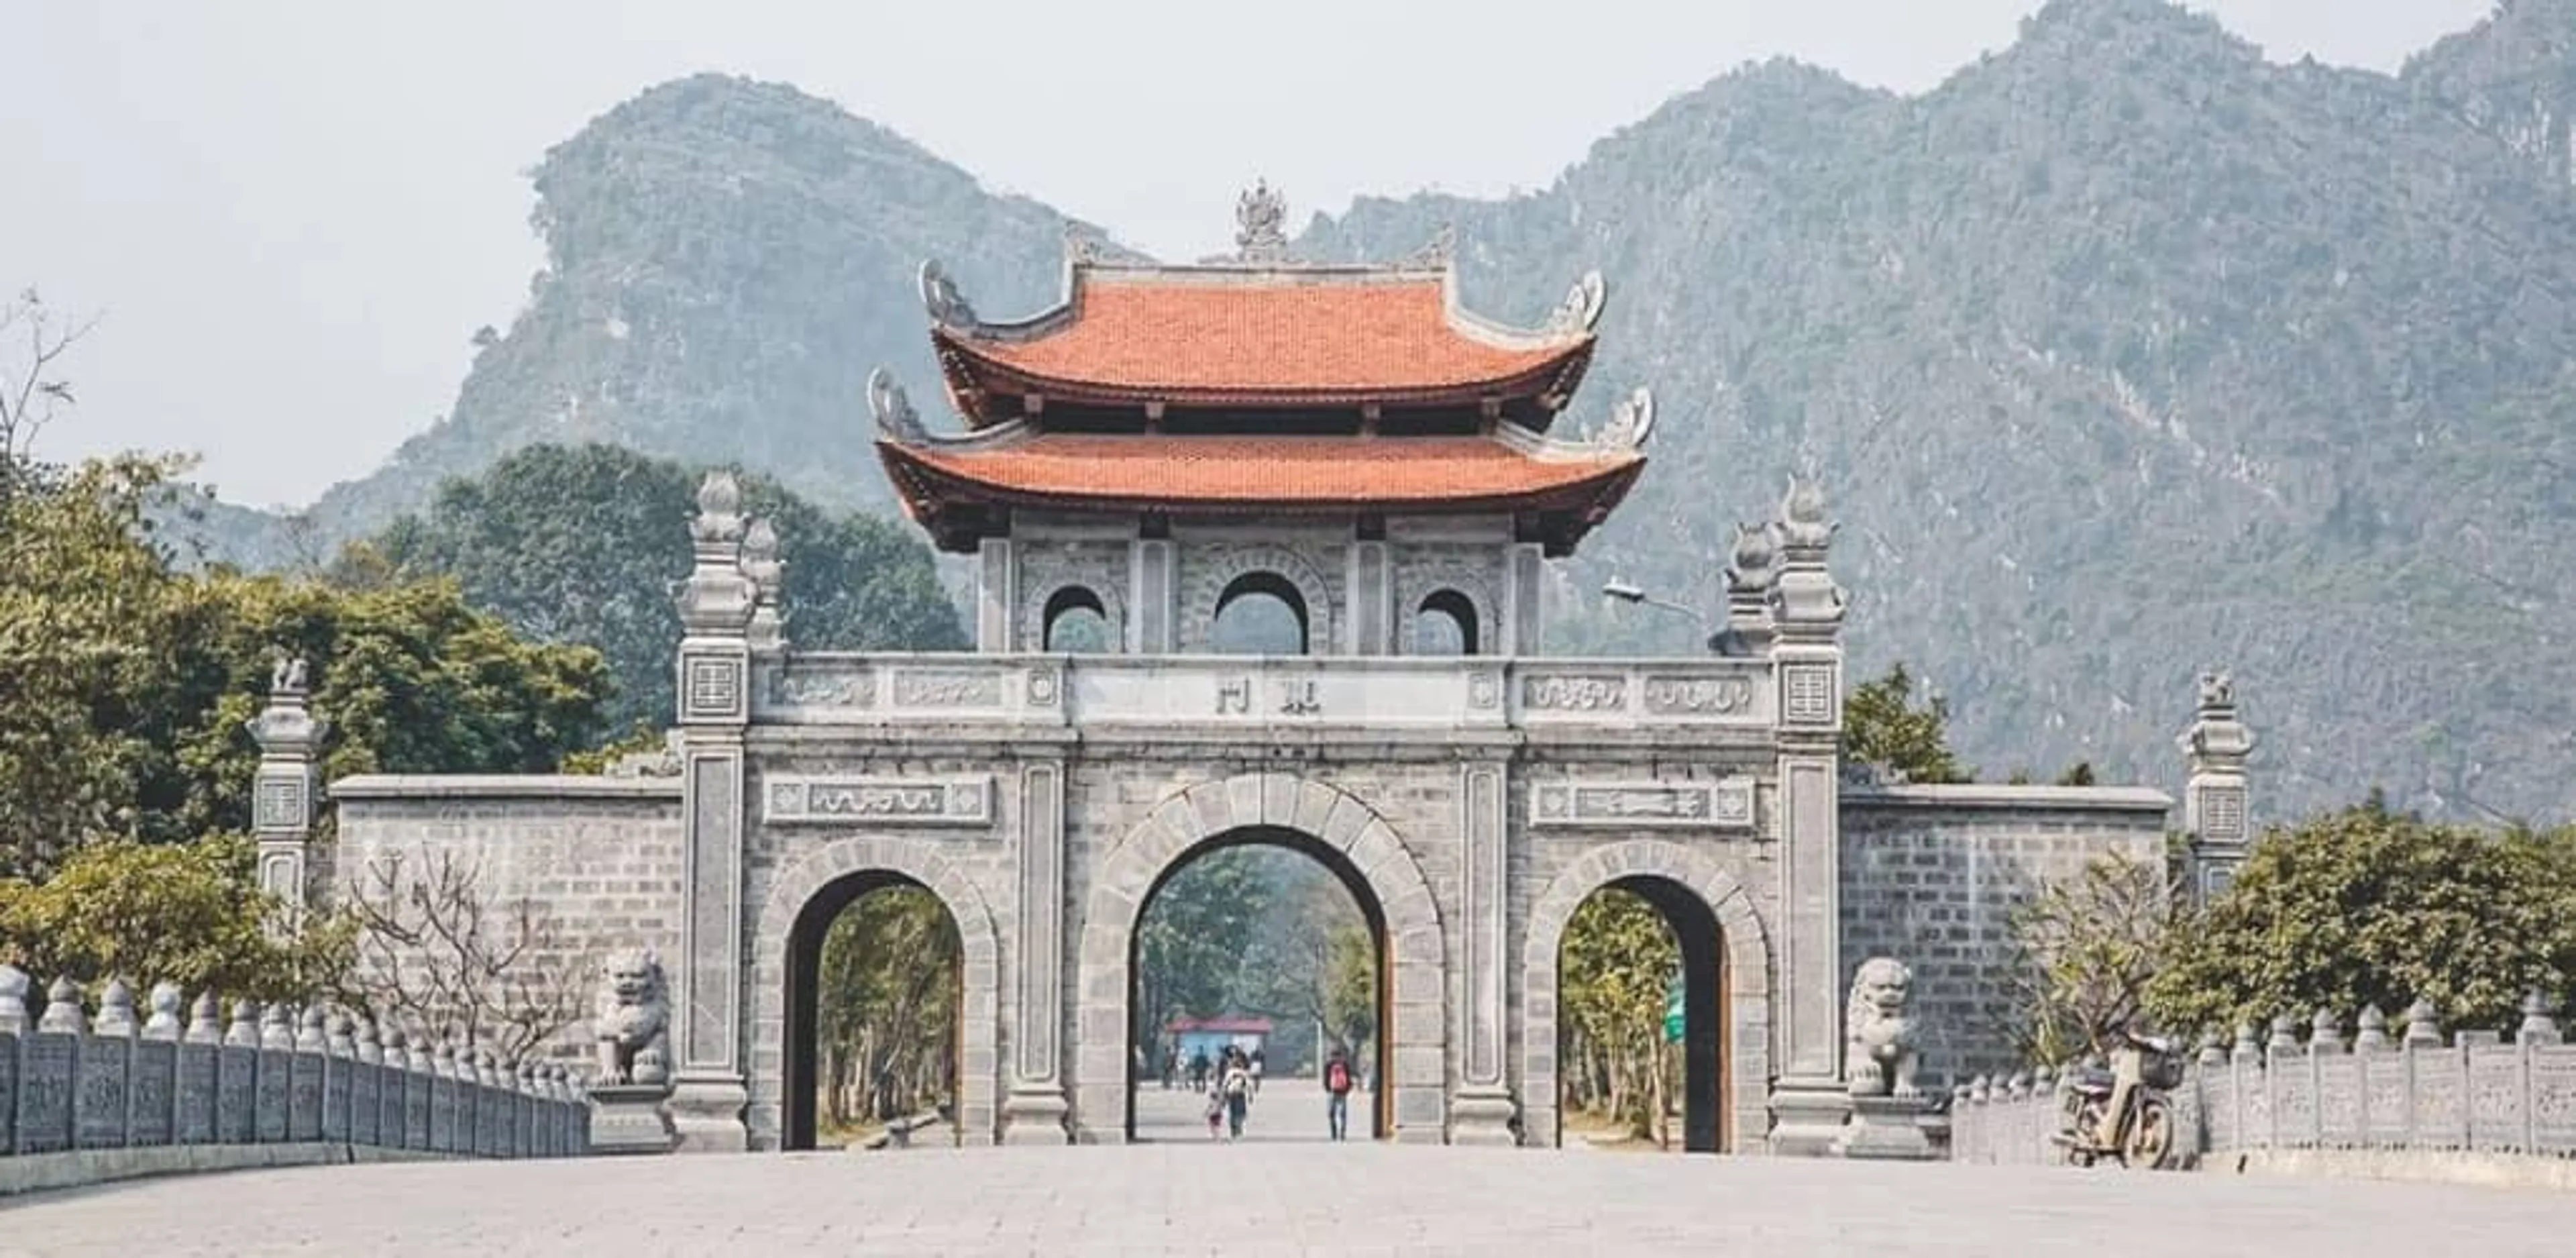 Explore Hoa Lu Ancient Capital - Journey to the ancient land